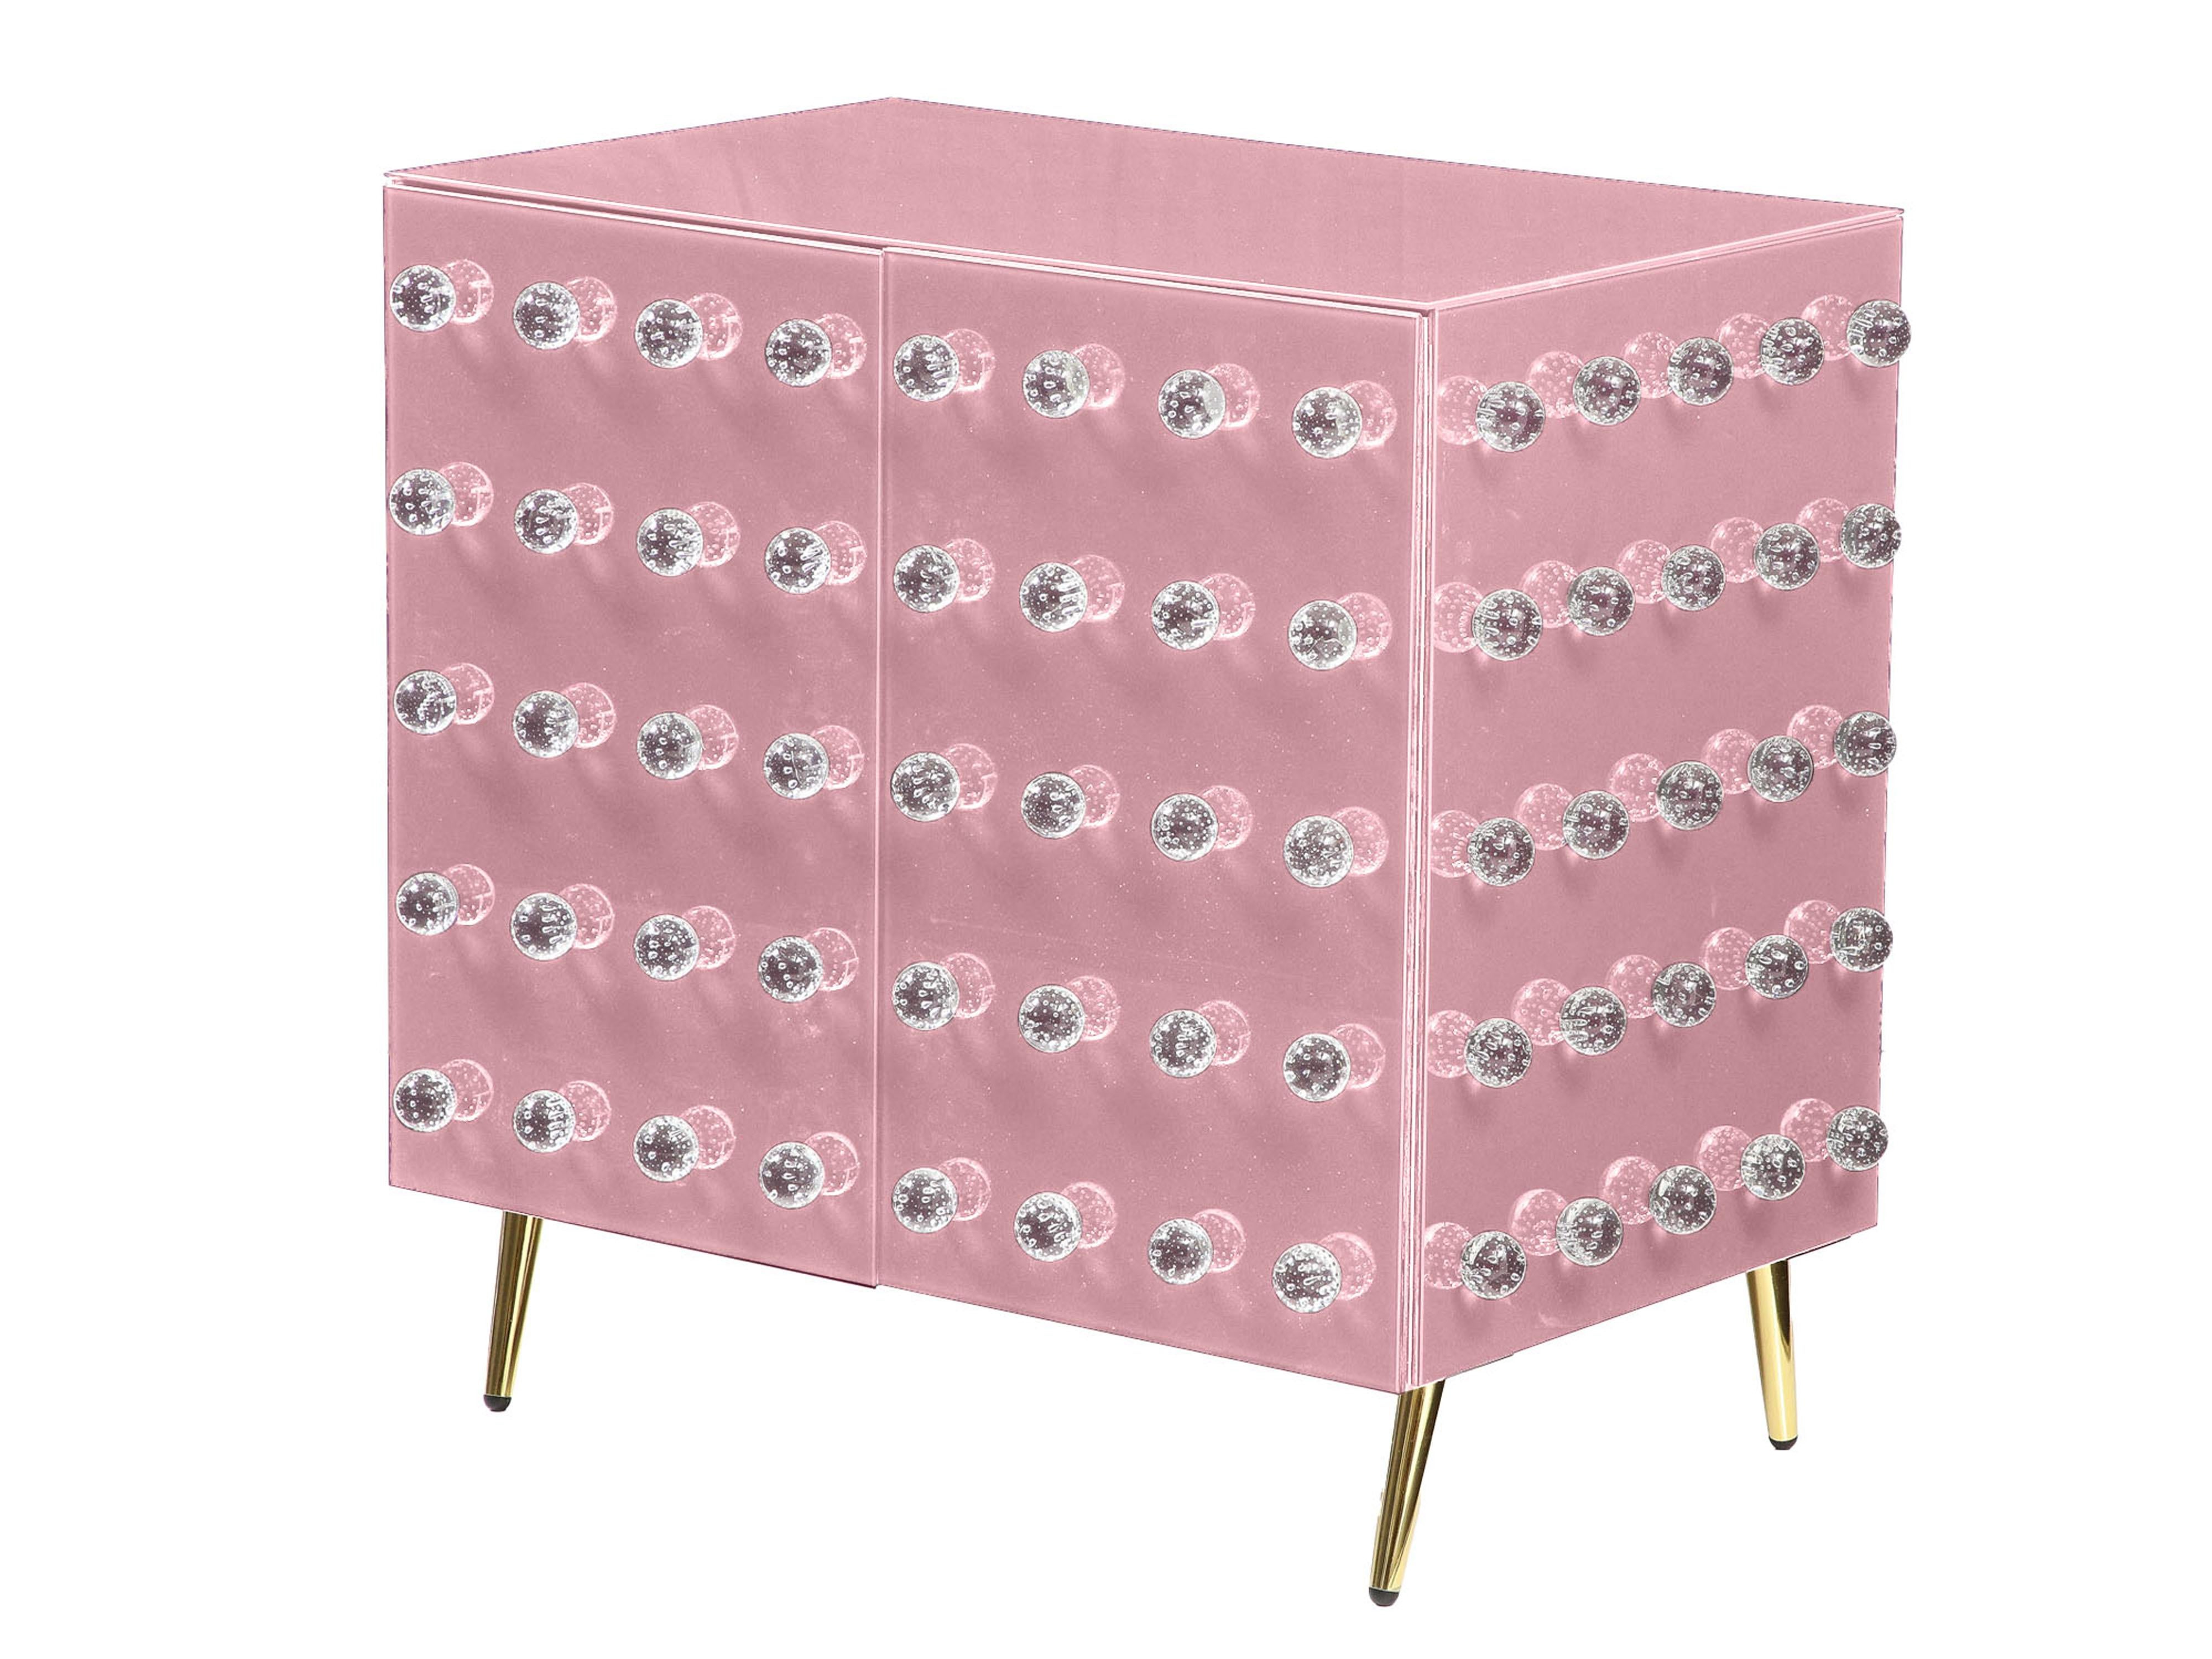 Discover the epitome of Italian craftsmanship with this exquisite pink Murano glass cabinet, a limited-edition masterpiece. 

Handcrafted by skilled Venetian artisans, this cabinet showcases the vibrant hues and intricate patterns of Murano's